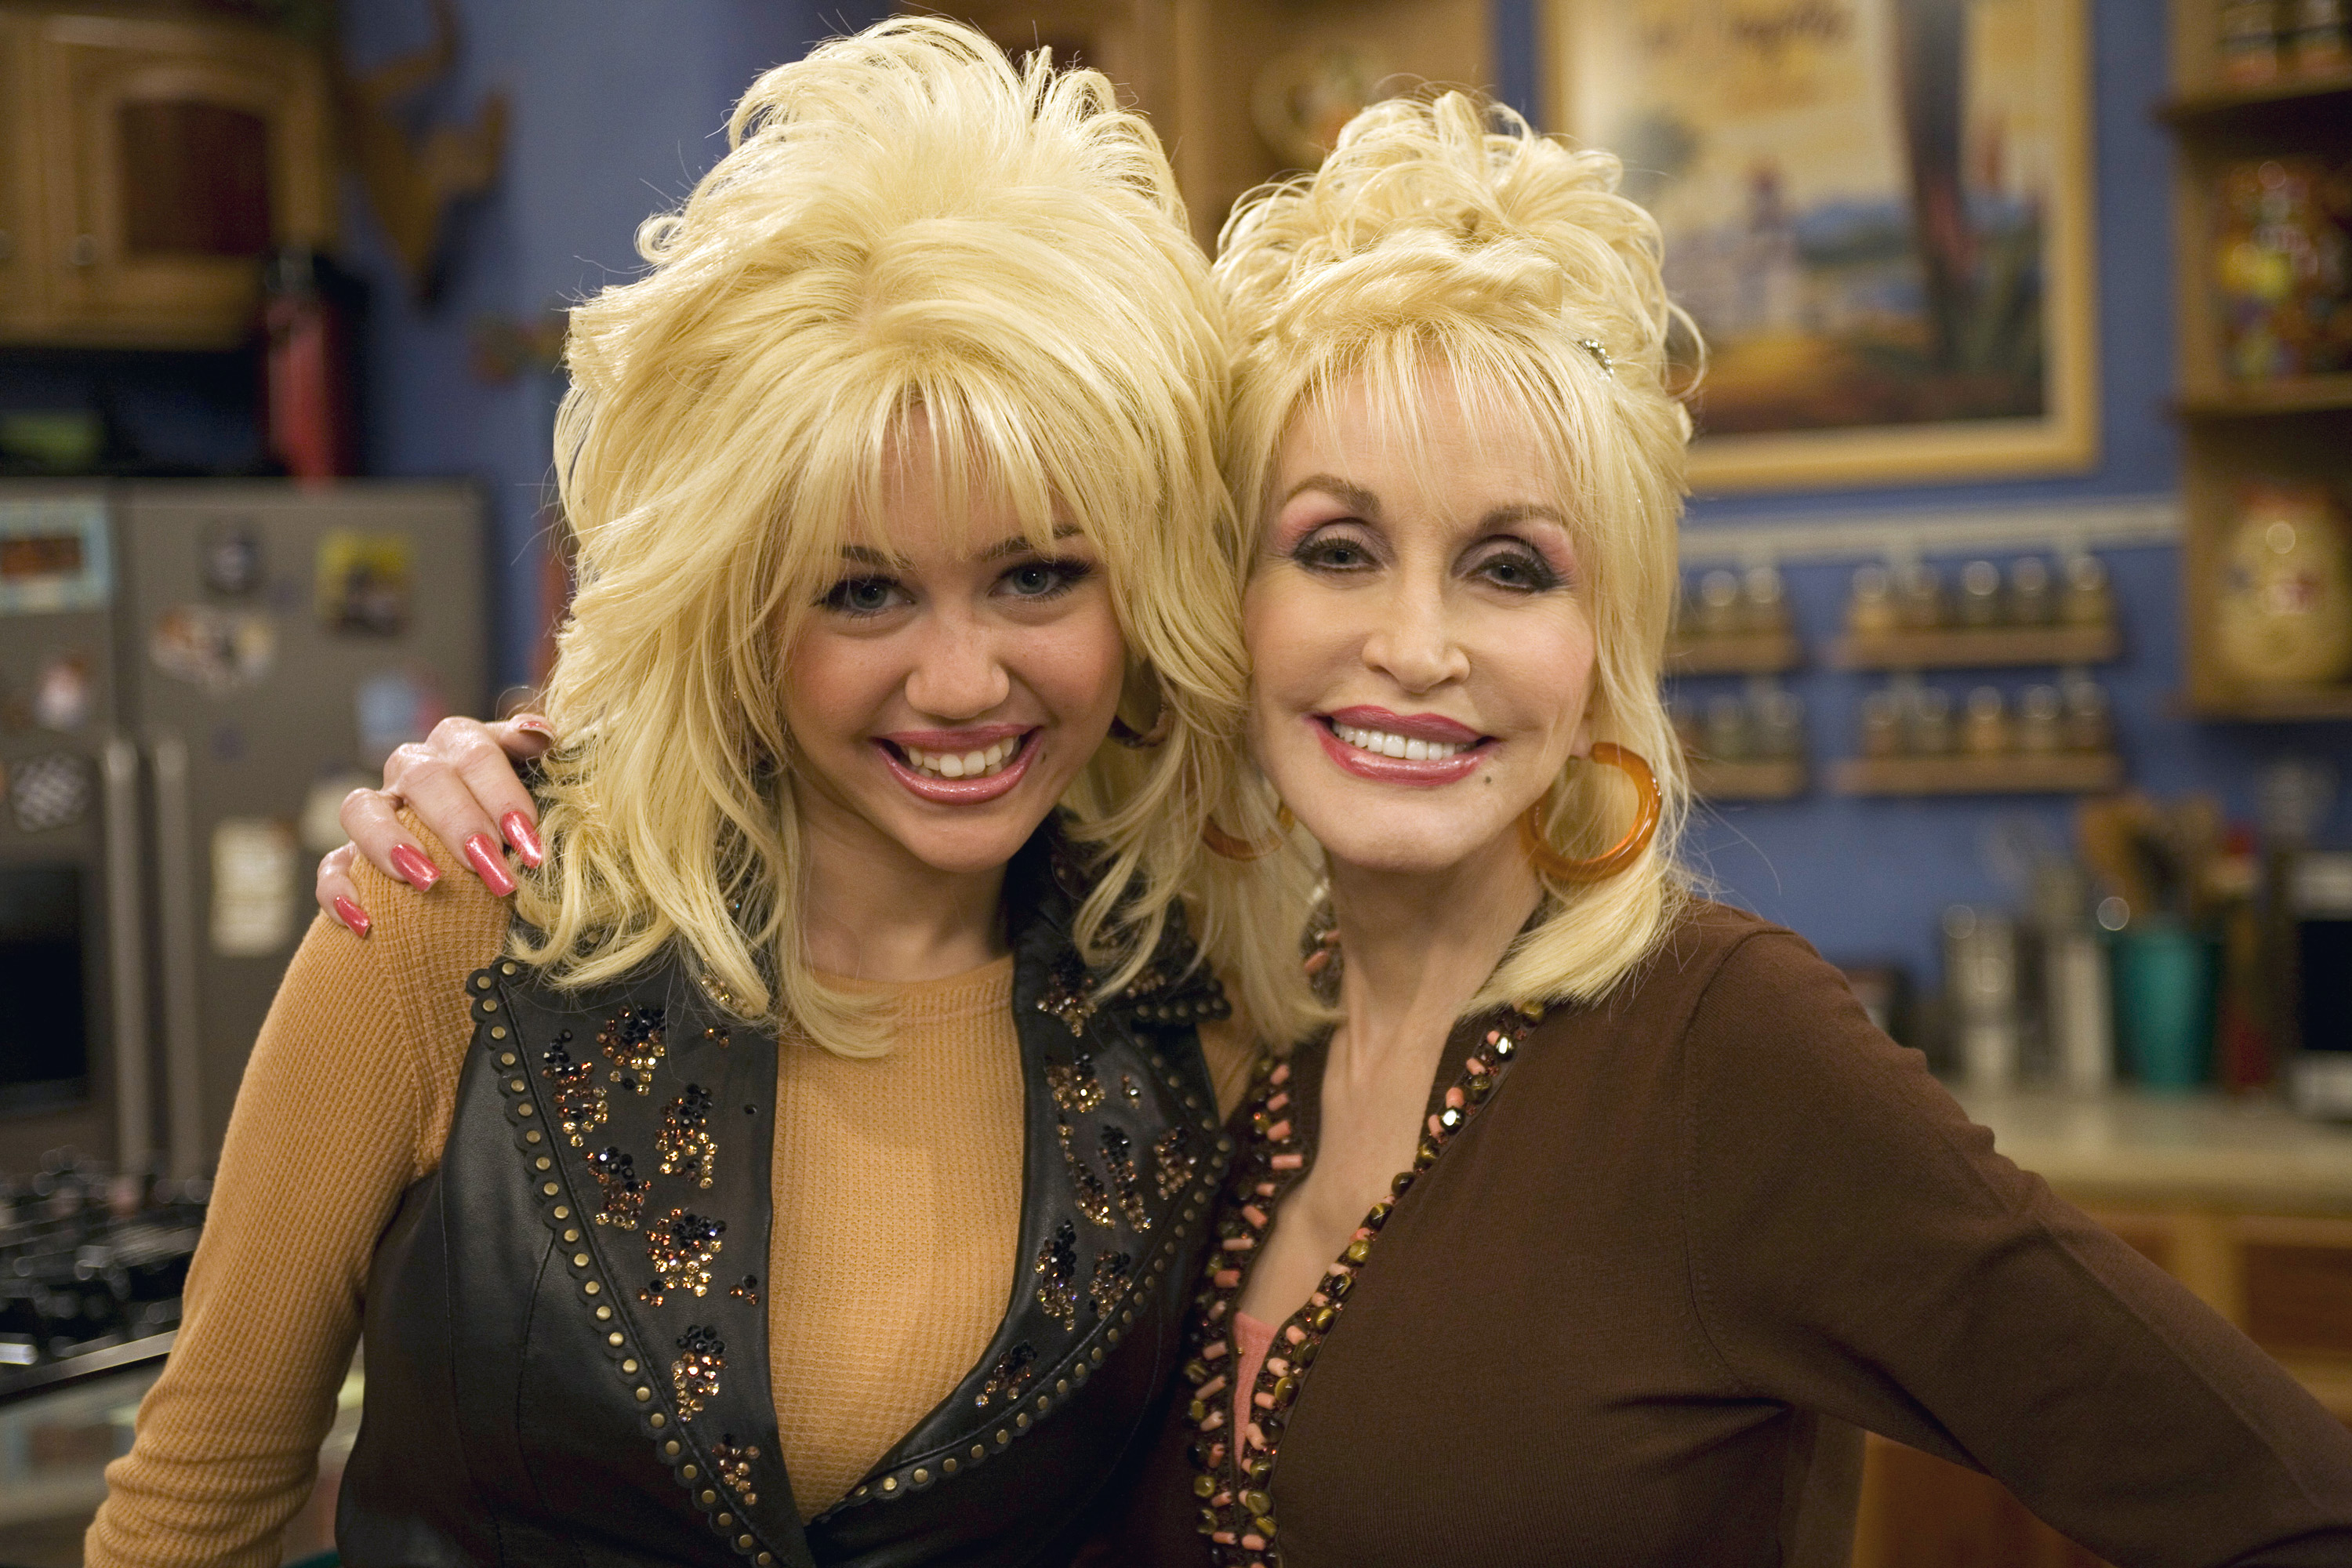 Miley Cyrus and Dolly Parton on "Hannah Montana" on May 31, 2007 | Source: Getty Images